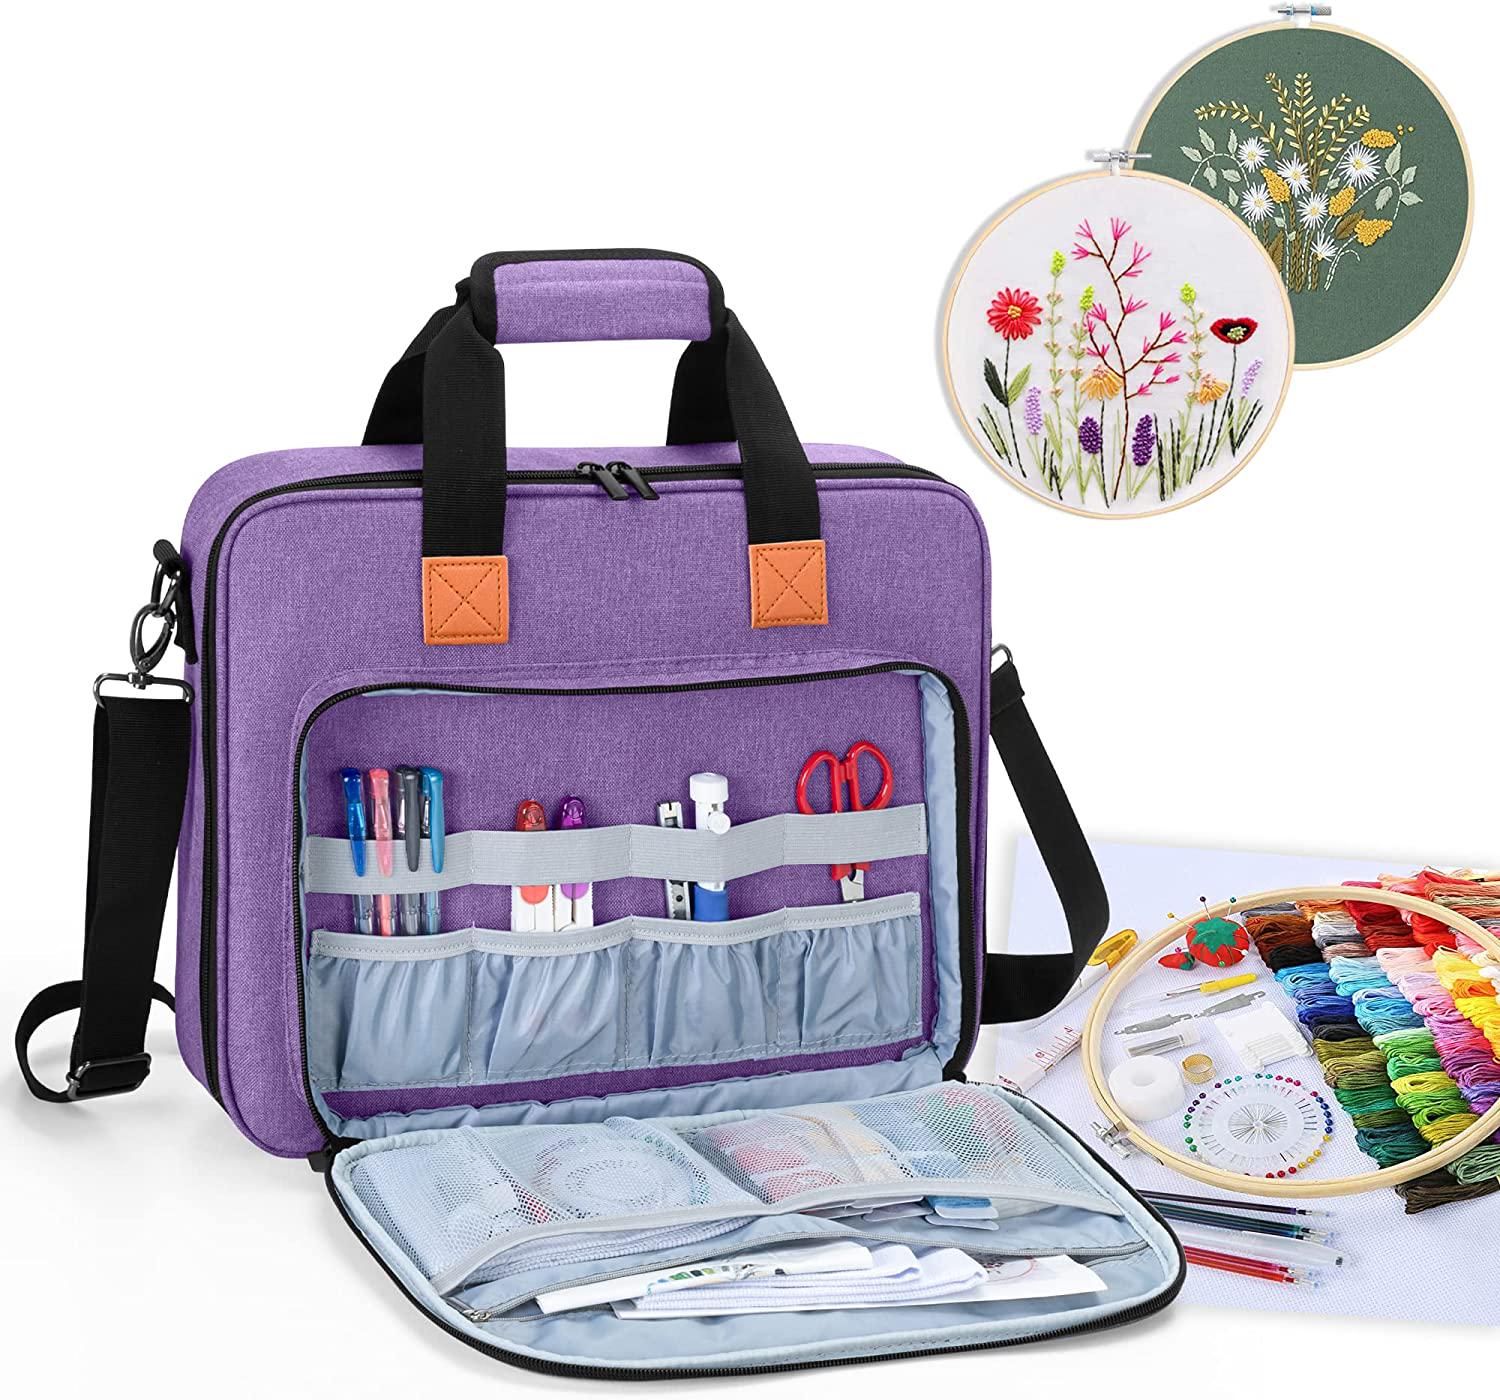 LUXJA, Luxja Embroidery Project Bag, Embroidery Kits Storage Bag (Bag Only), Purple